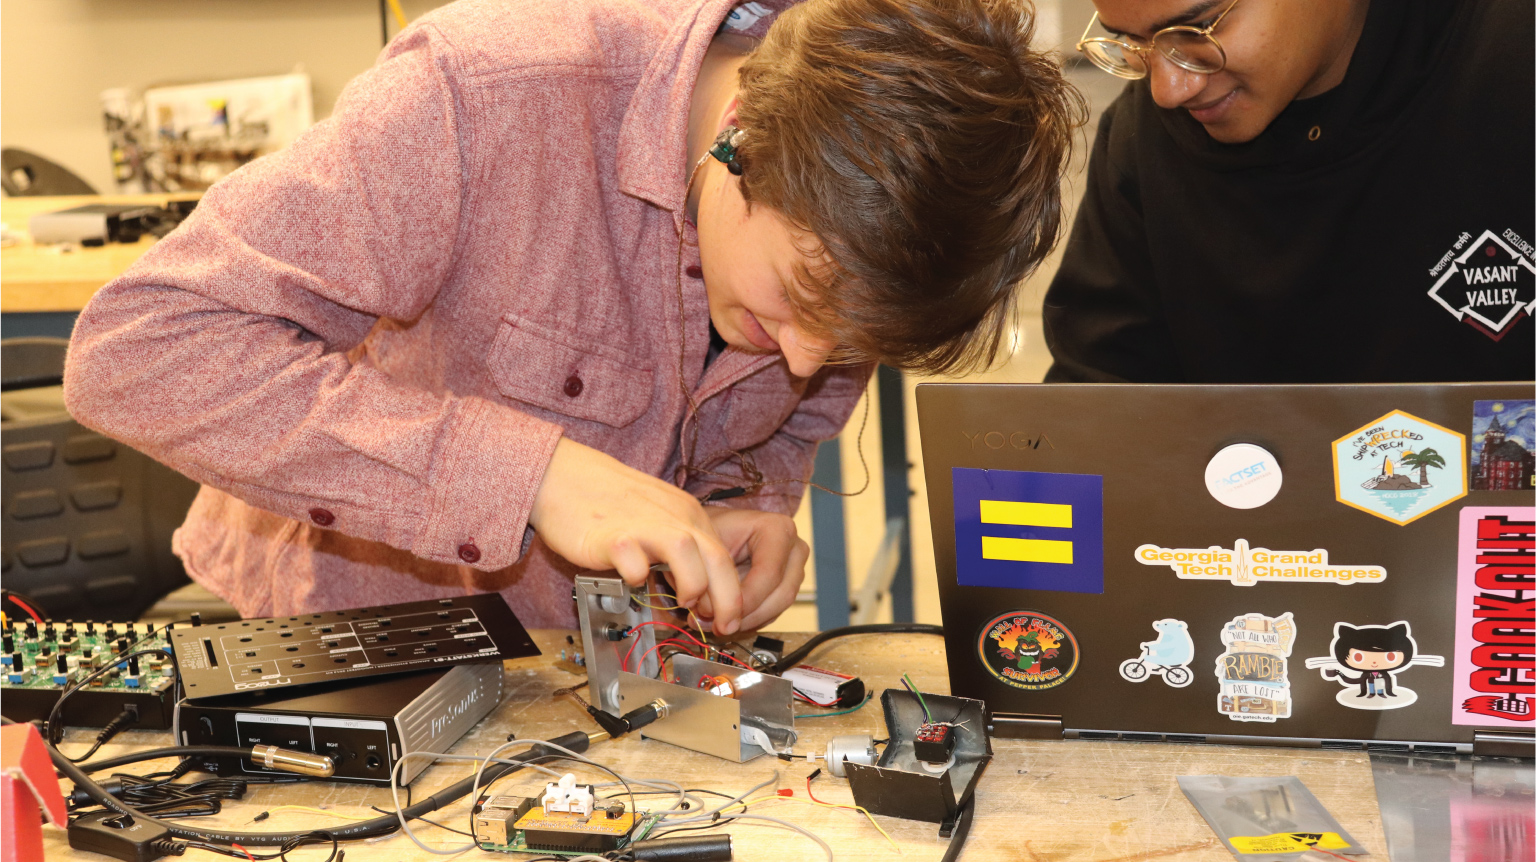 Students work on hardware project